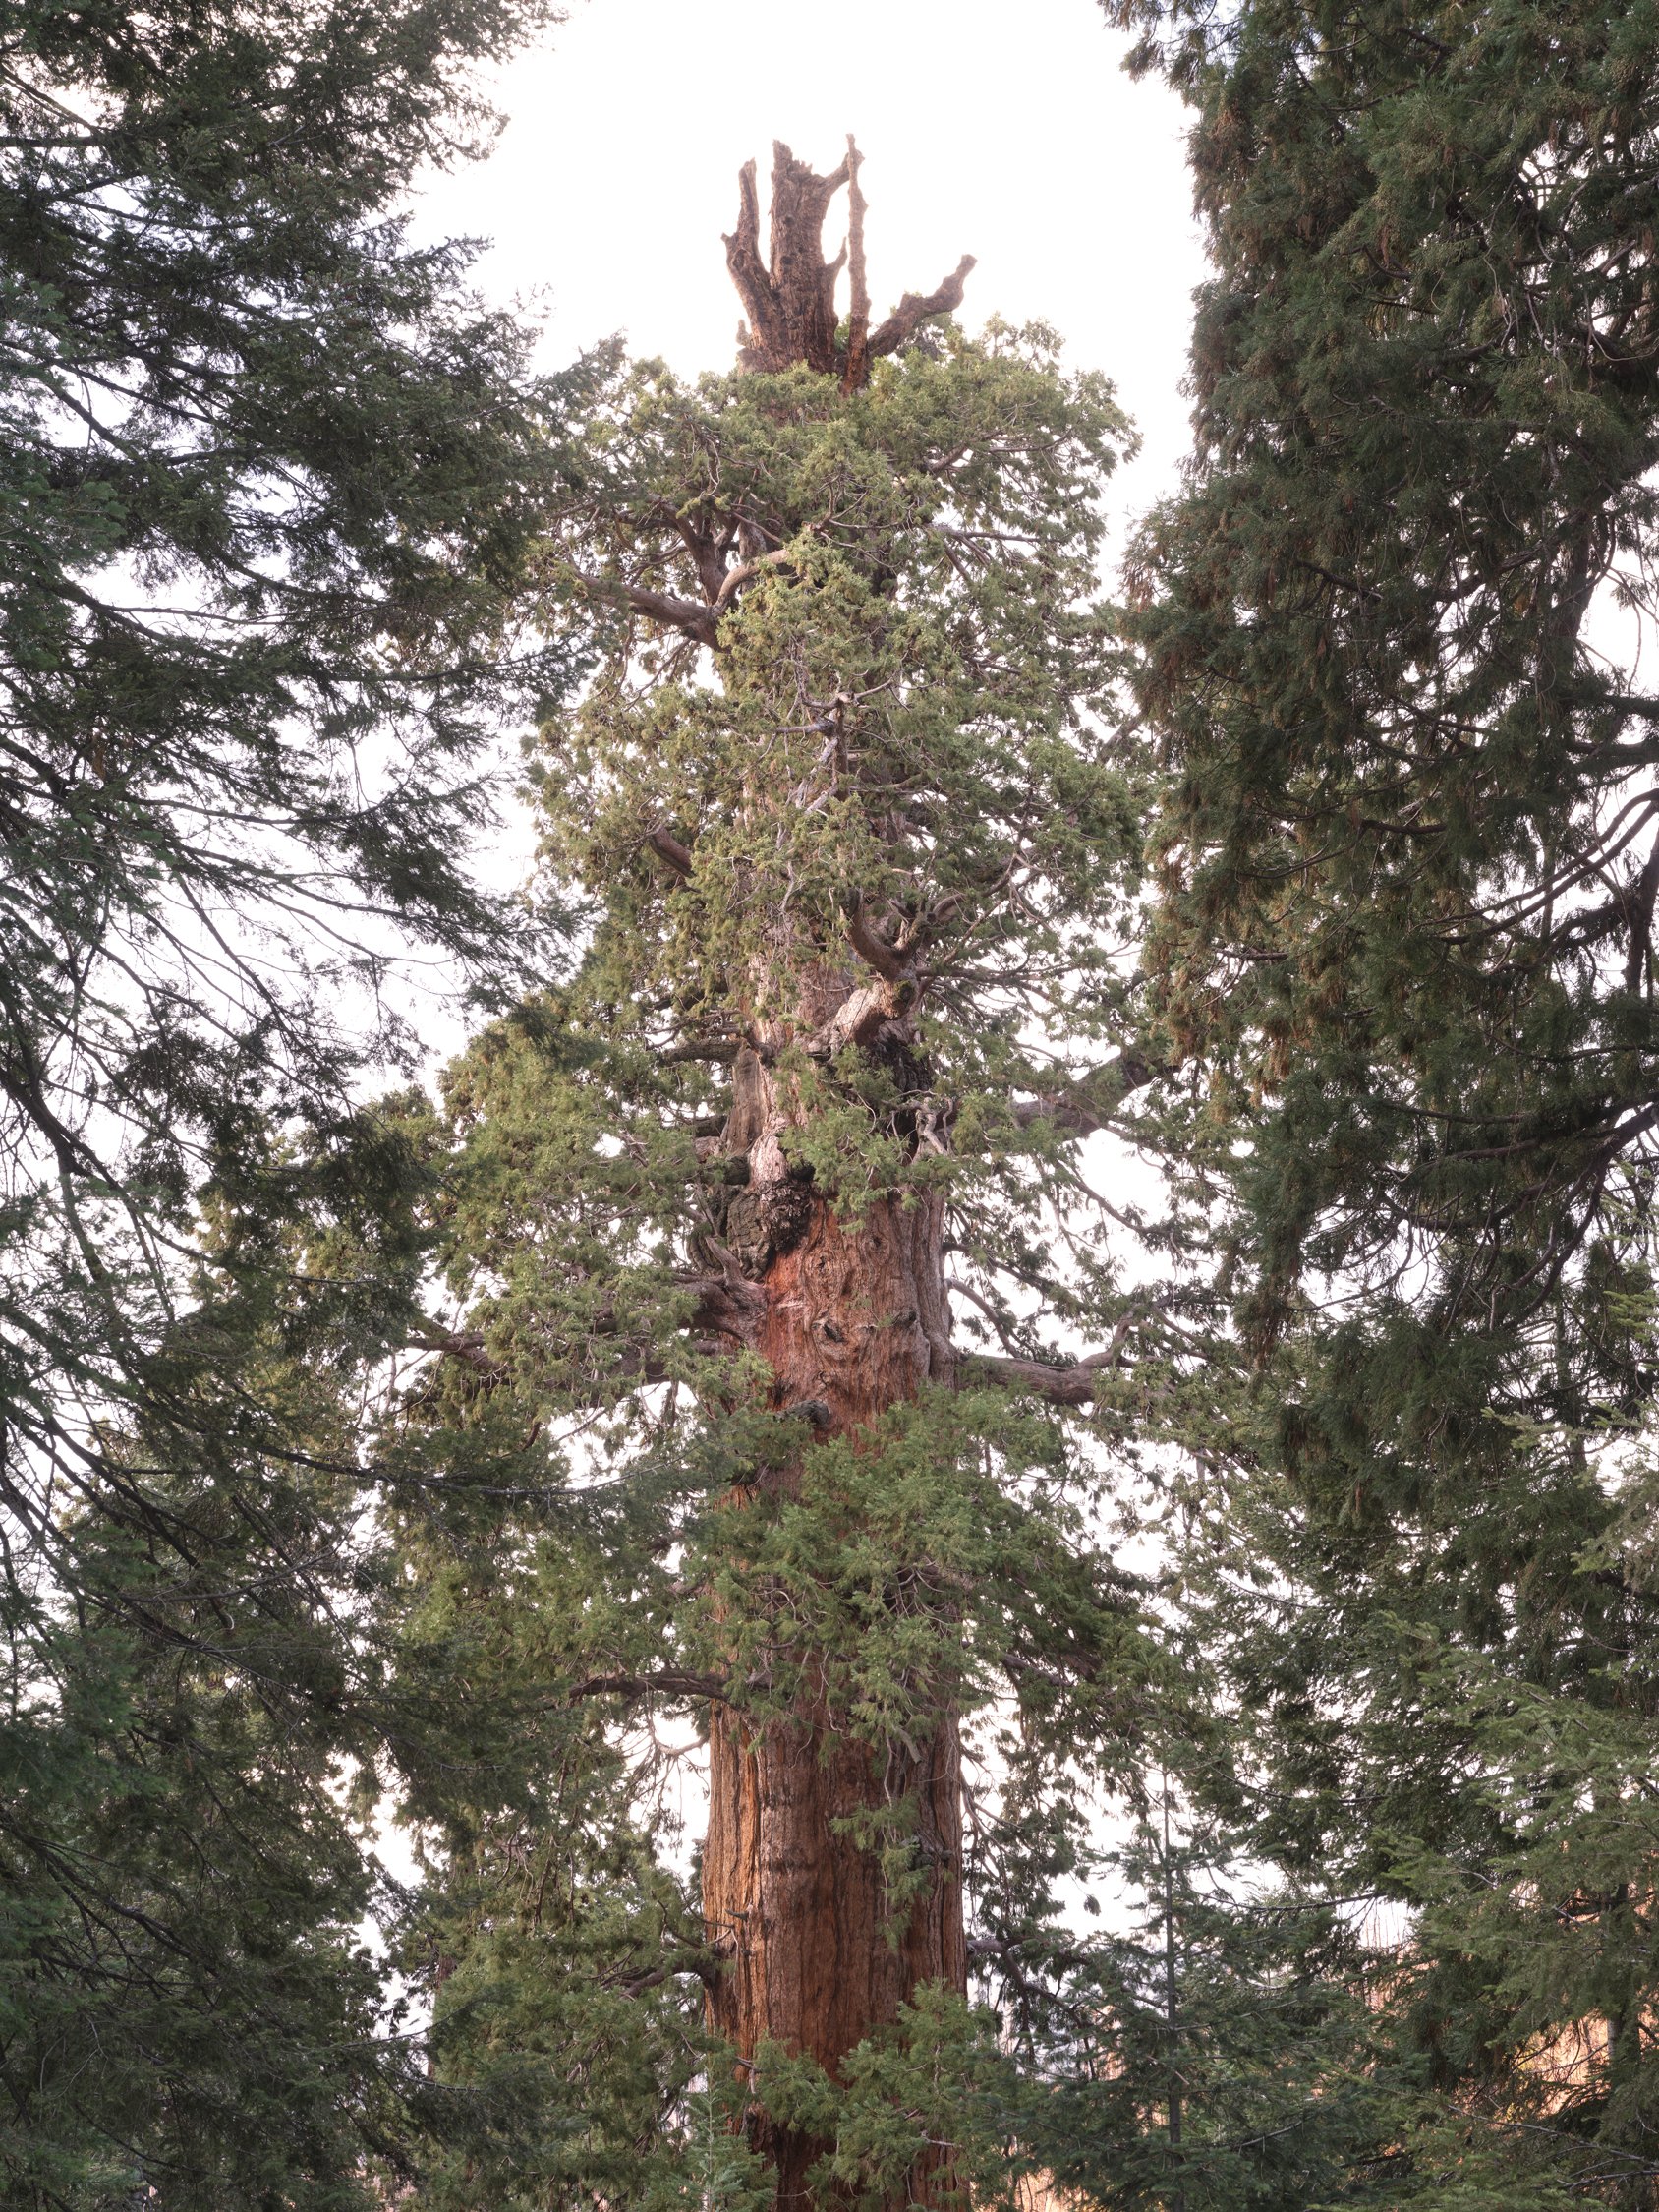 gathering_growth_foundation_stagg_tree_giant_sequoia_brian_kelley_02-2022_04.jpg